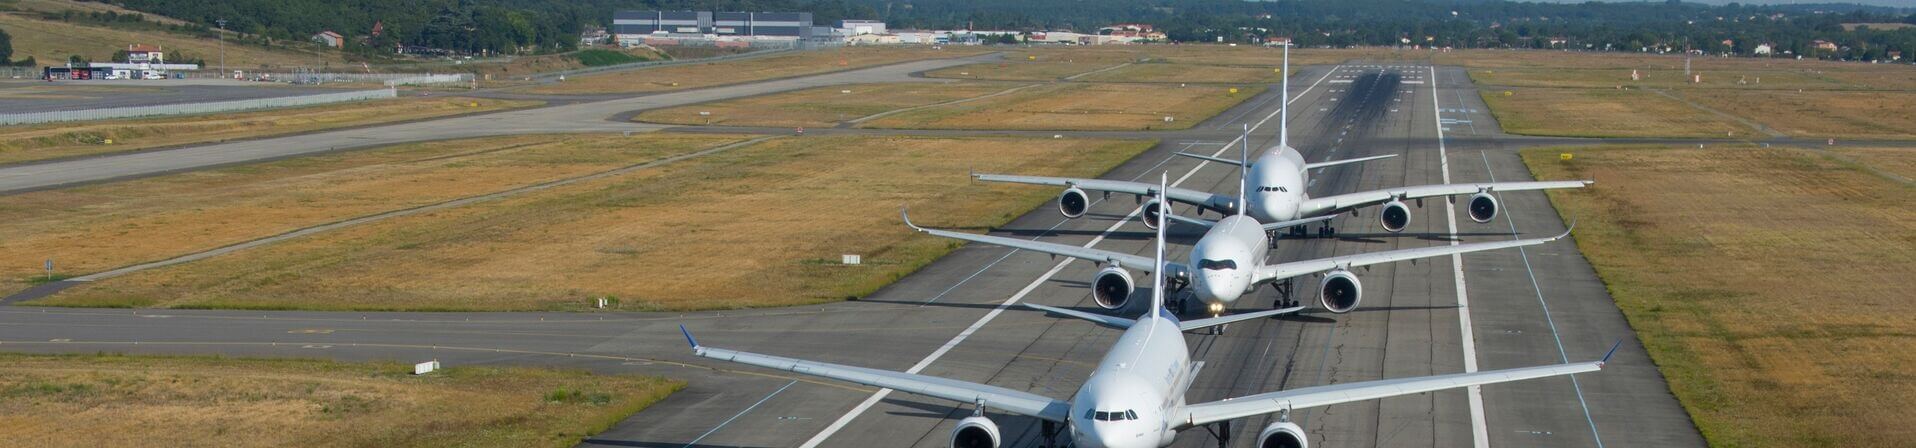 France €15 billion support package aims to develop “green” aviation sector